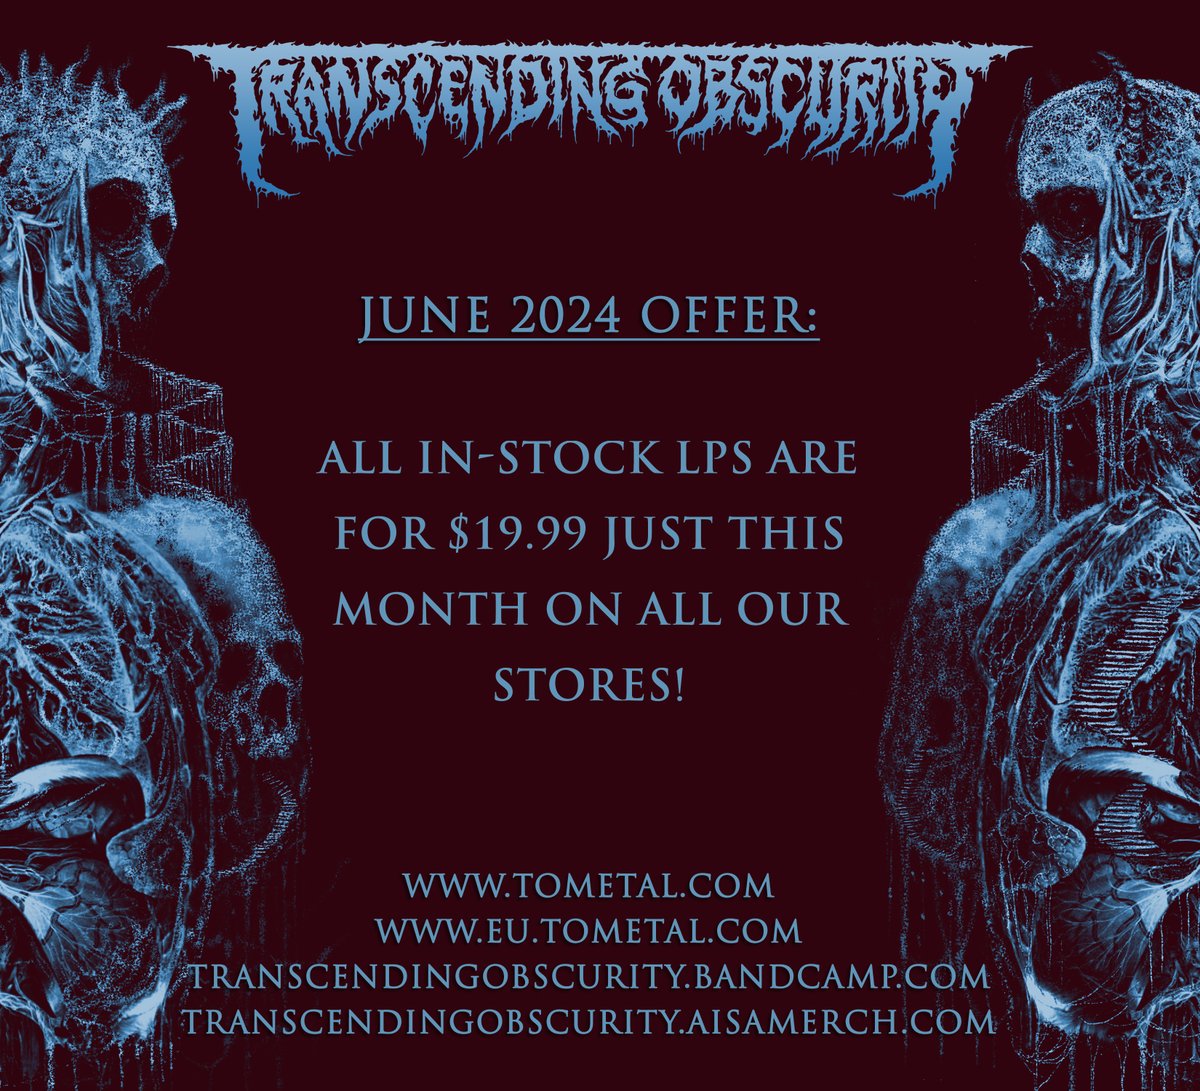 JUNE 2024 Offer: All in-stock LPs are for $19.99 just this month on all our stores! We've got many more LPs on the way and it would be cool if we could make some room for them. This offer is valid on all four stores of ours so feel free to check them out. Here's the direct link…